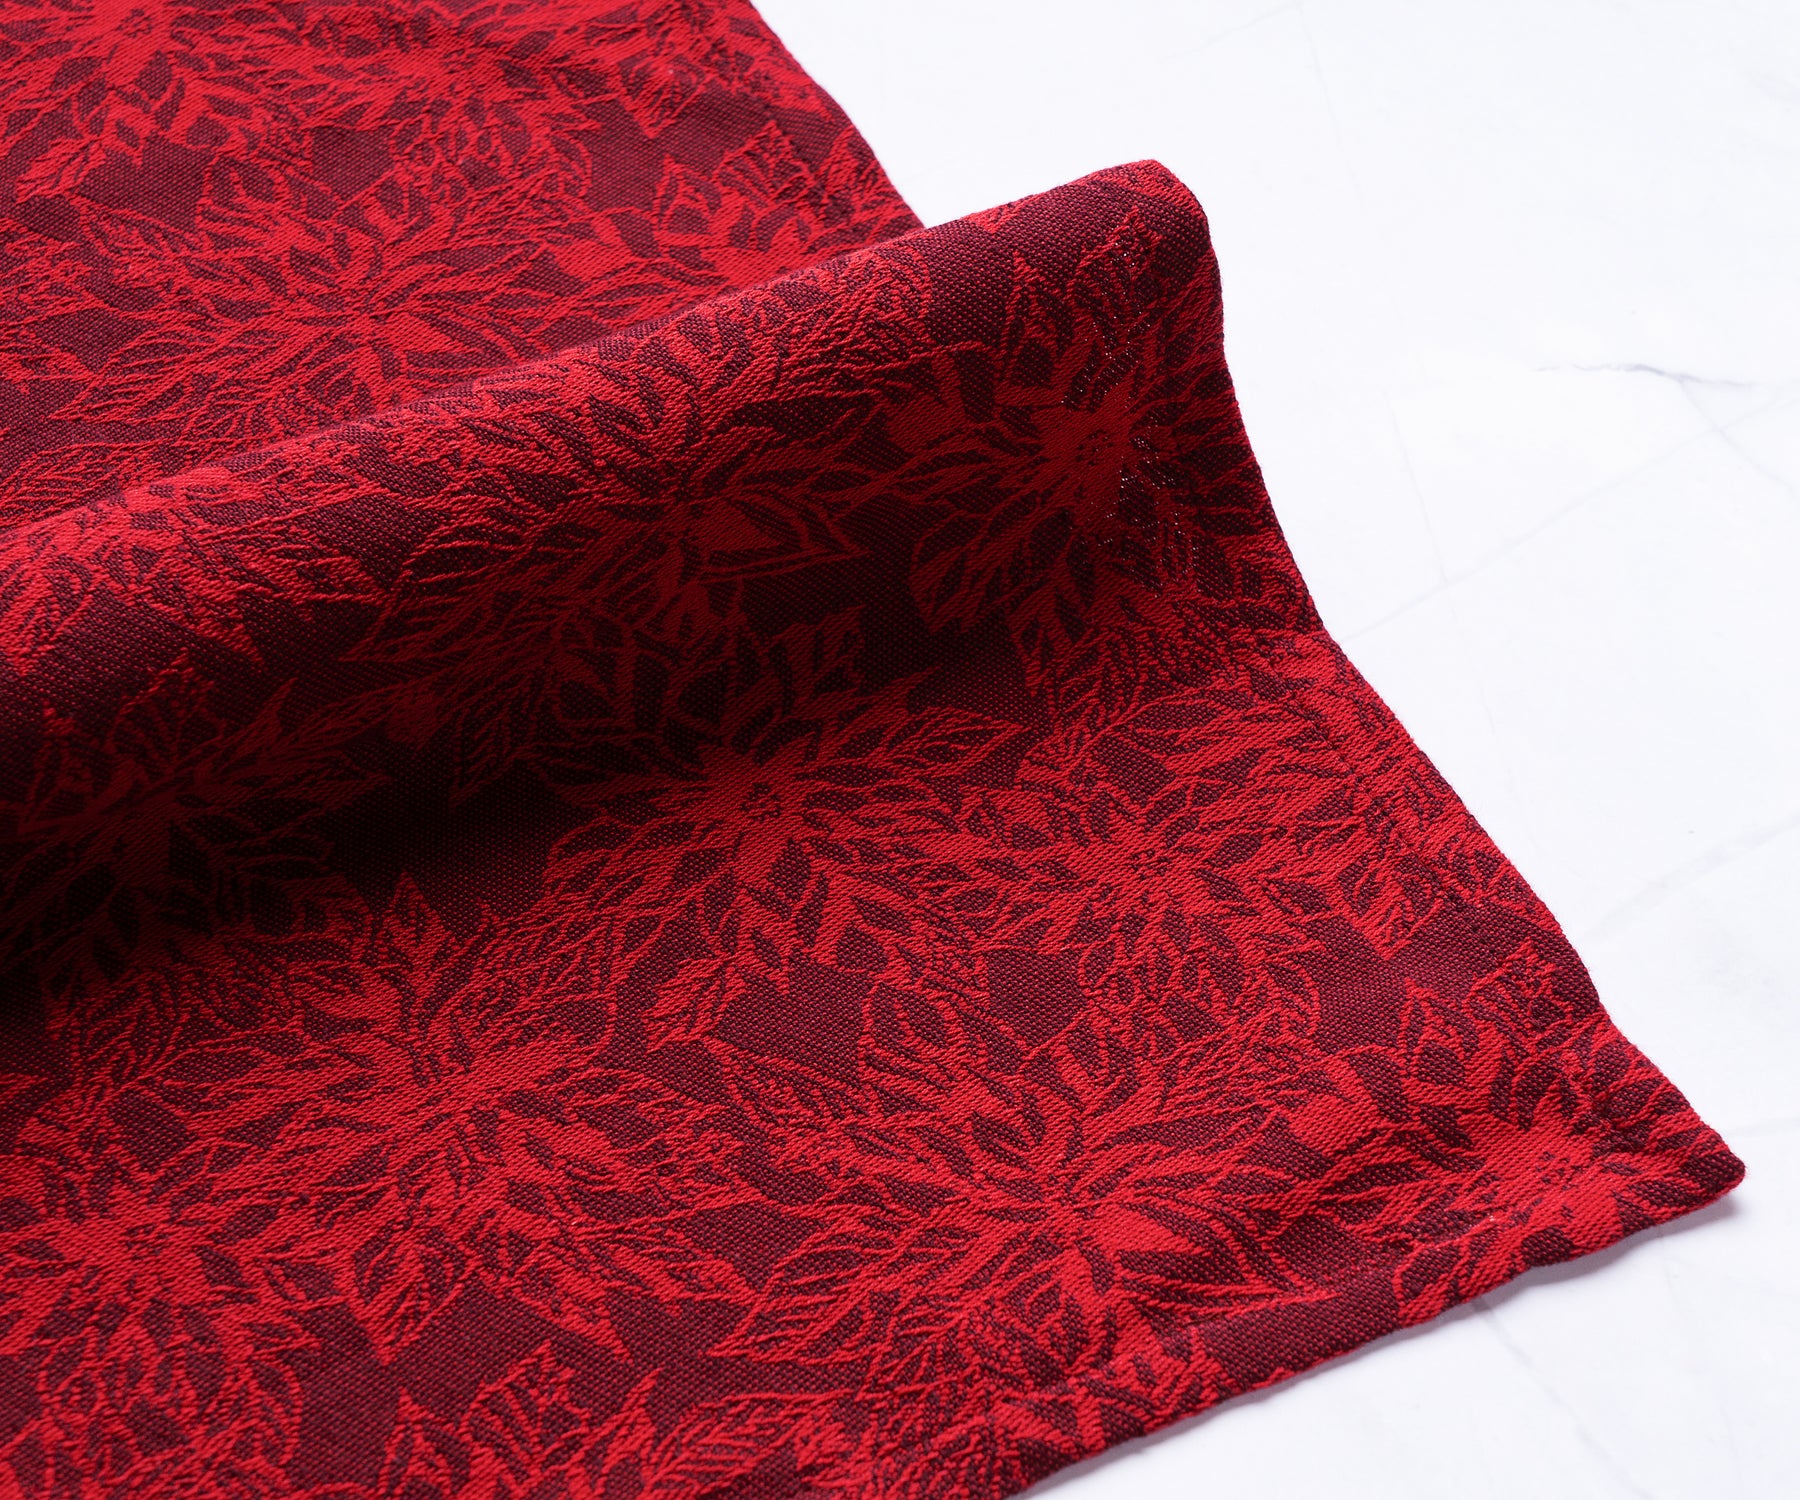 Red Cloth Napkins: Red jacquard napkins come in various sizes to suit different table settings. Common sizes include cocktail napkins, luncheon napkins, and dinner napkins.